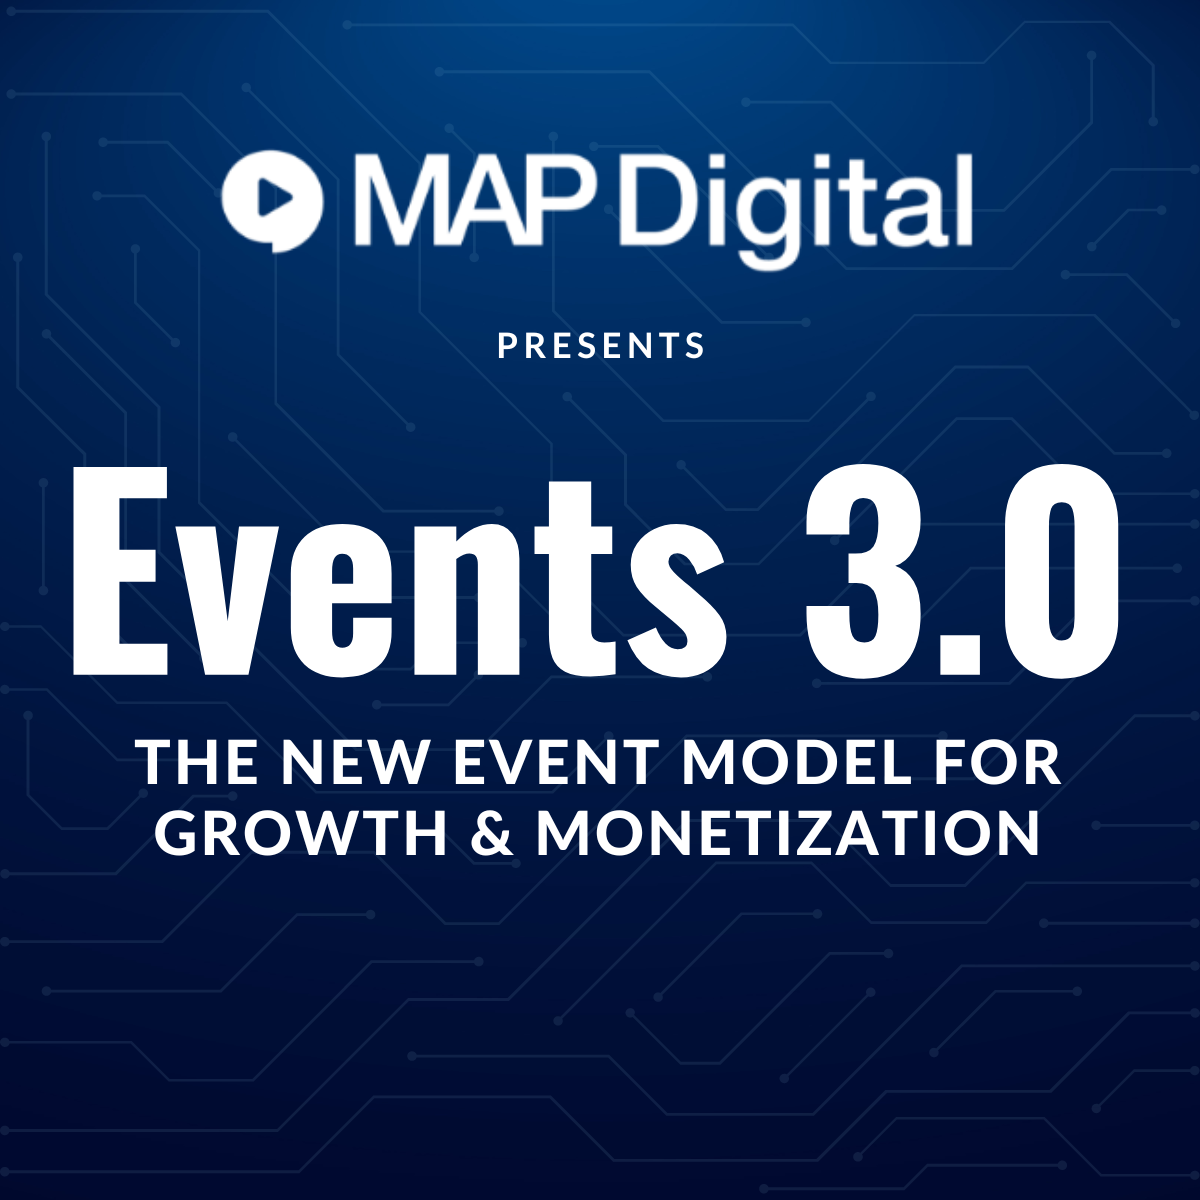 Events 3.0 by MAP Digital